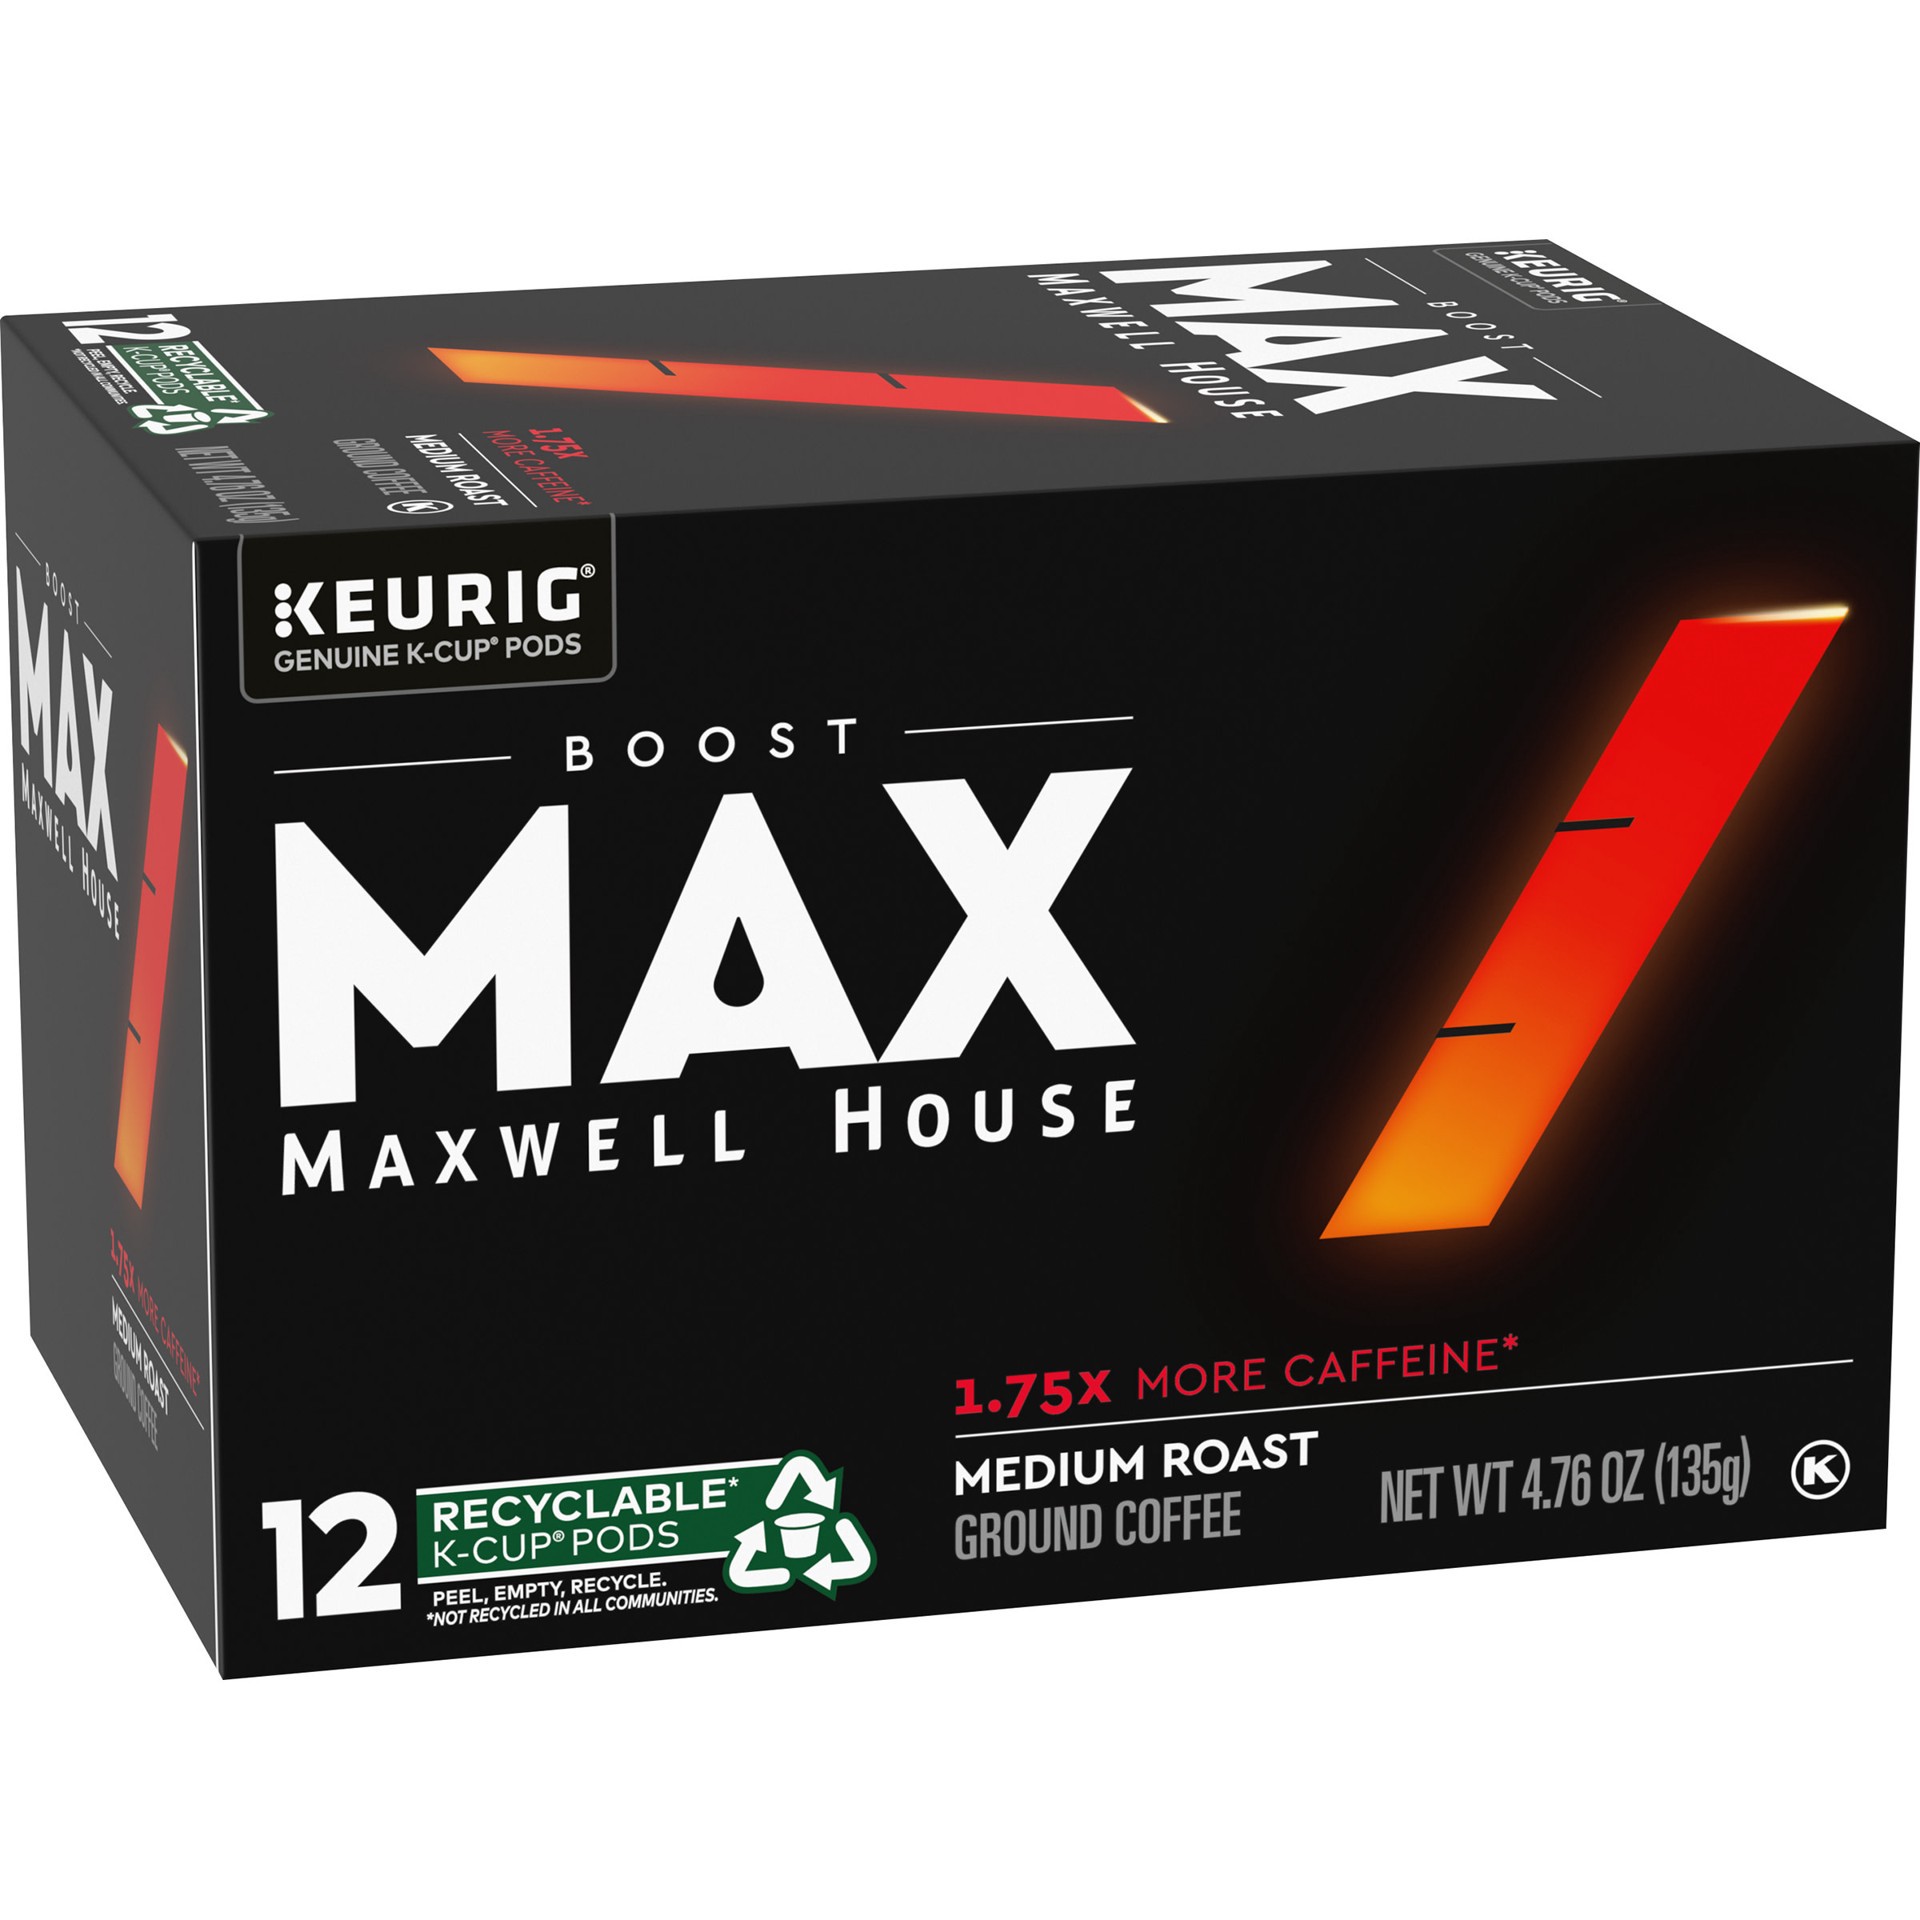 slide 3 of 4, Maxwell House Max Boost Medium Roast K-Cup Coffee Pods with 1.75X More Caffeine, 12 ct Box, 12 ct